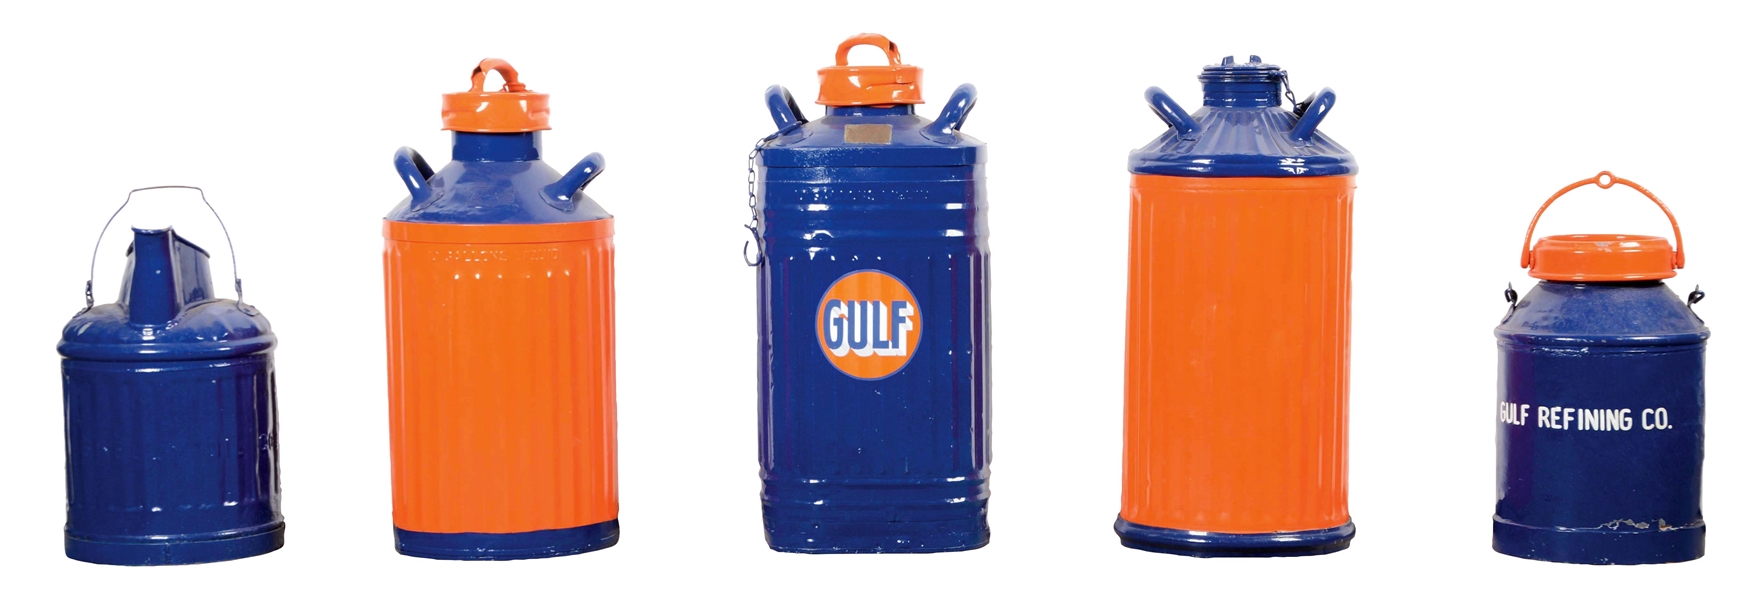 LOT OF 5: GULF GASOLINE & MOTOR OIL CANS.